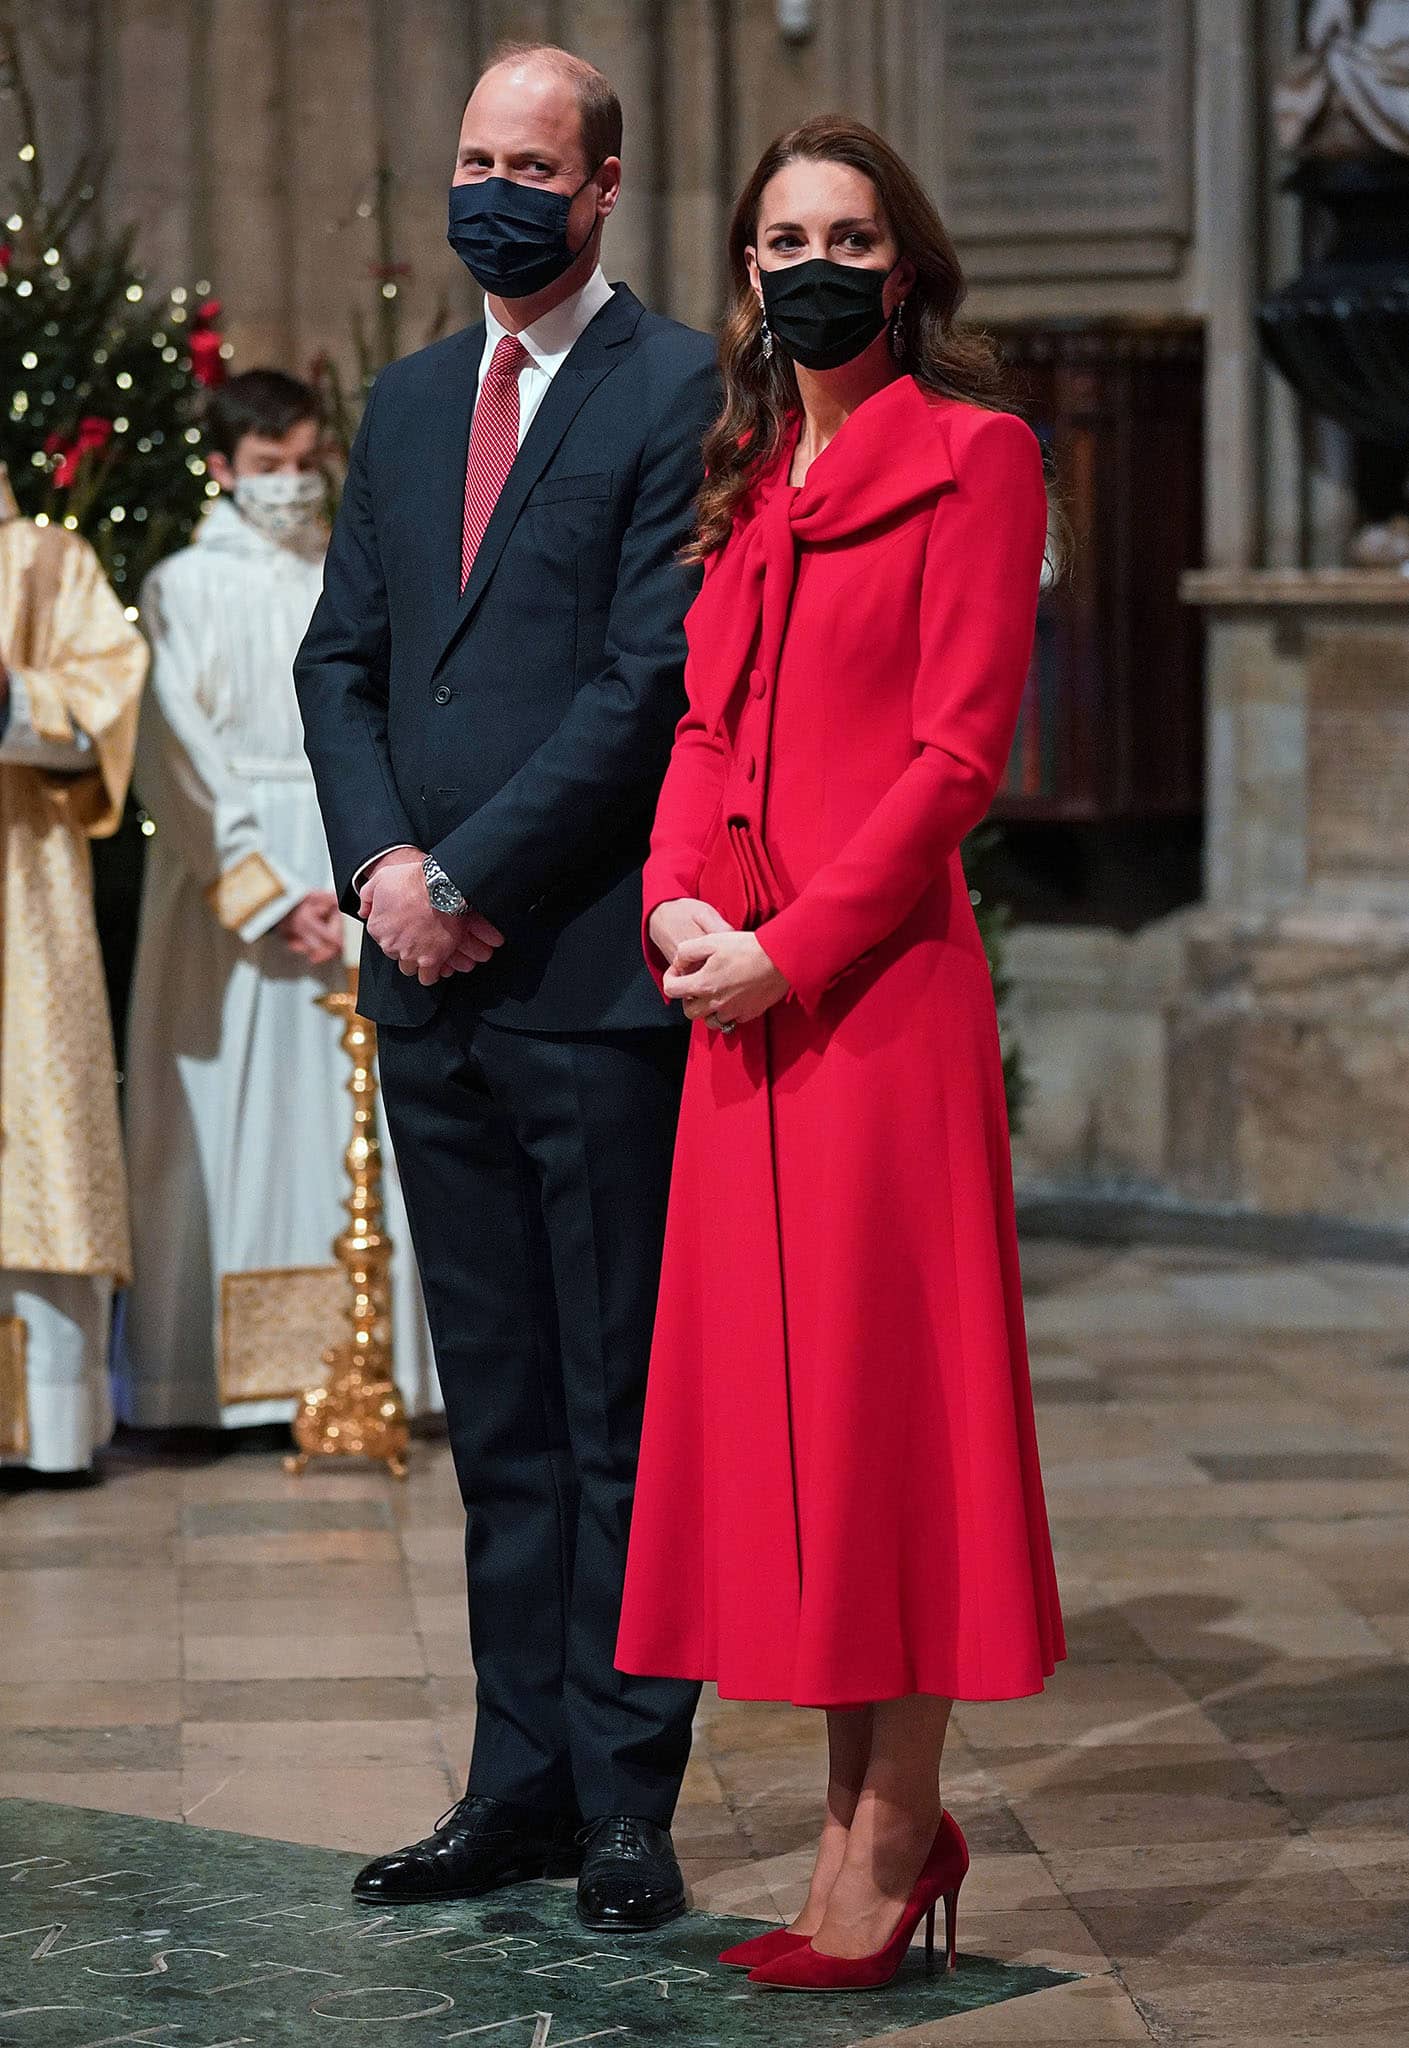 The Duke and Duchess of Cambridge attend the Together at Christmas community carol service at Westminster Abbey, London on December 8, 2021